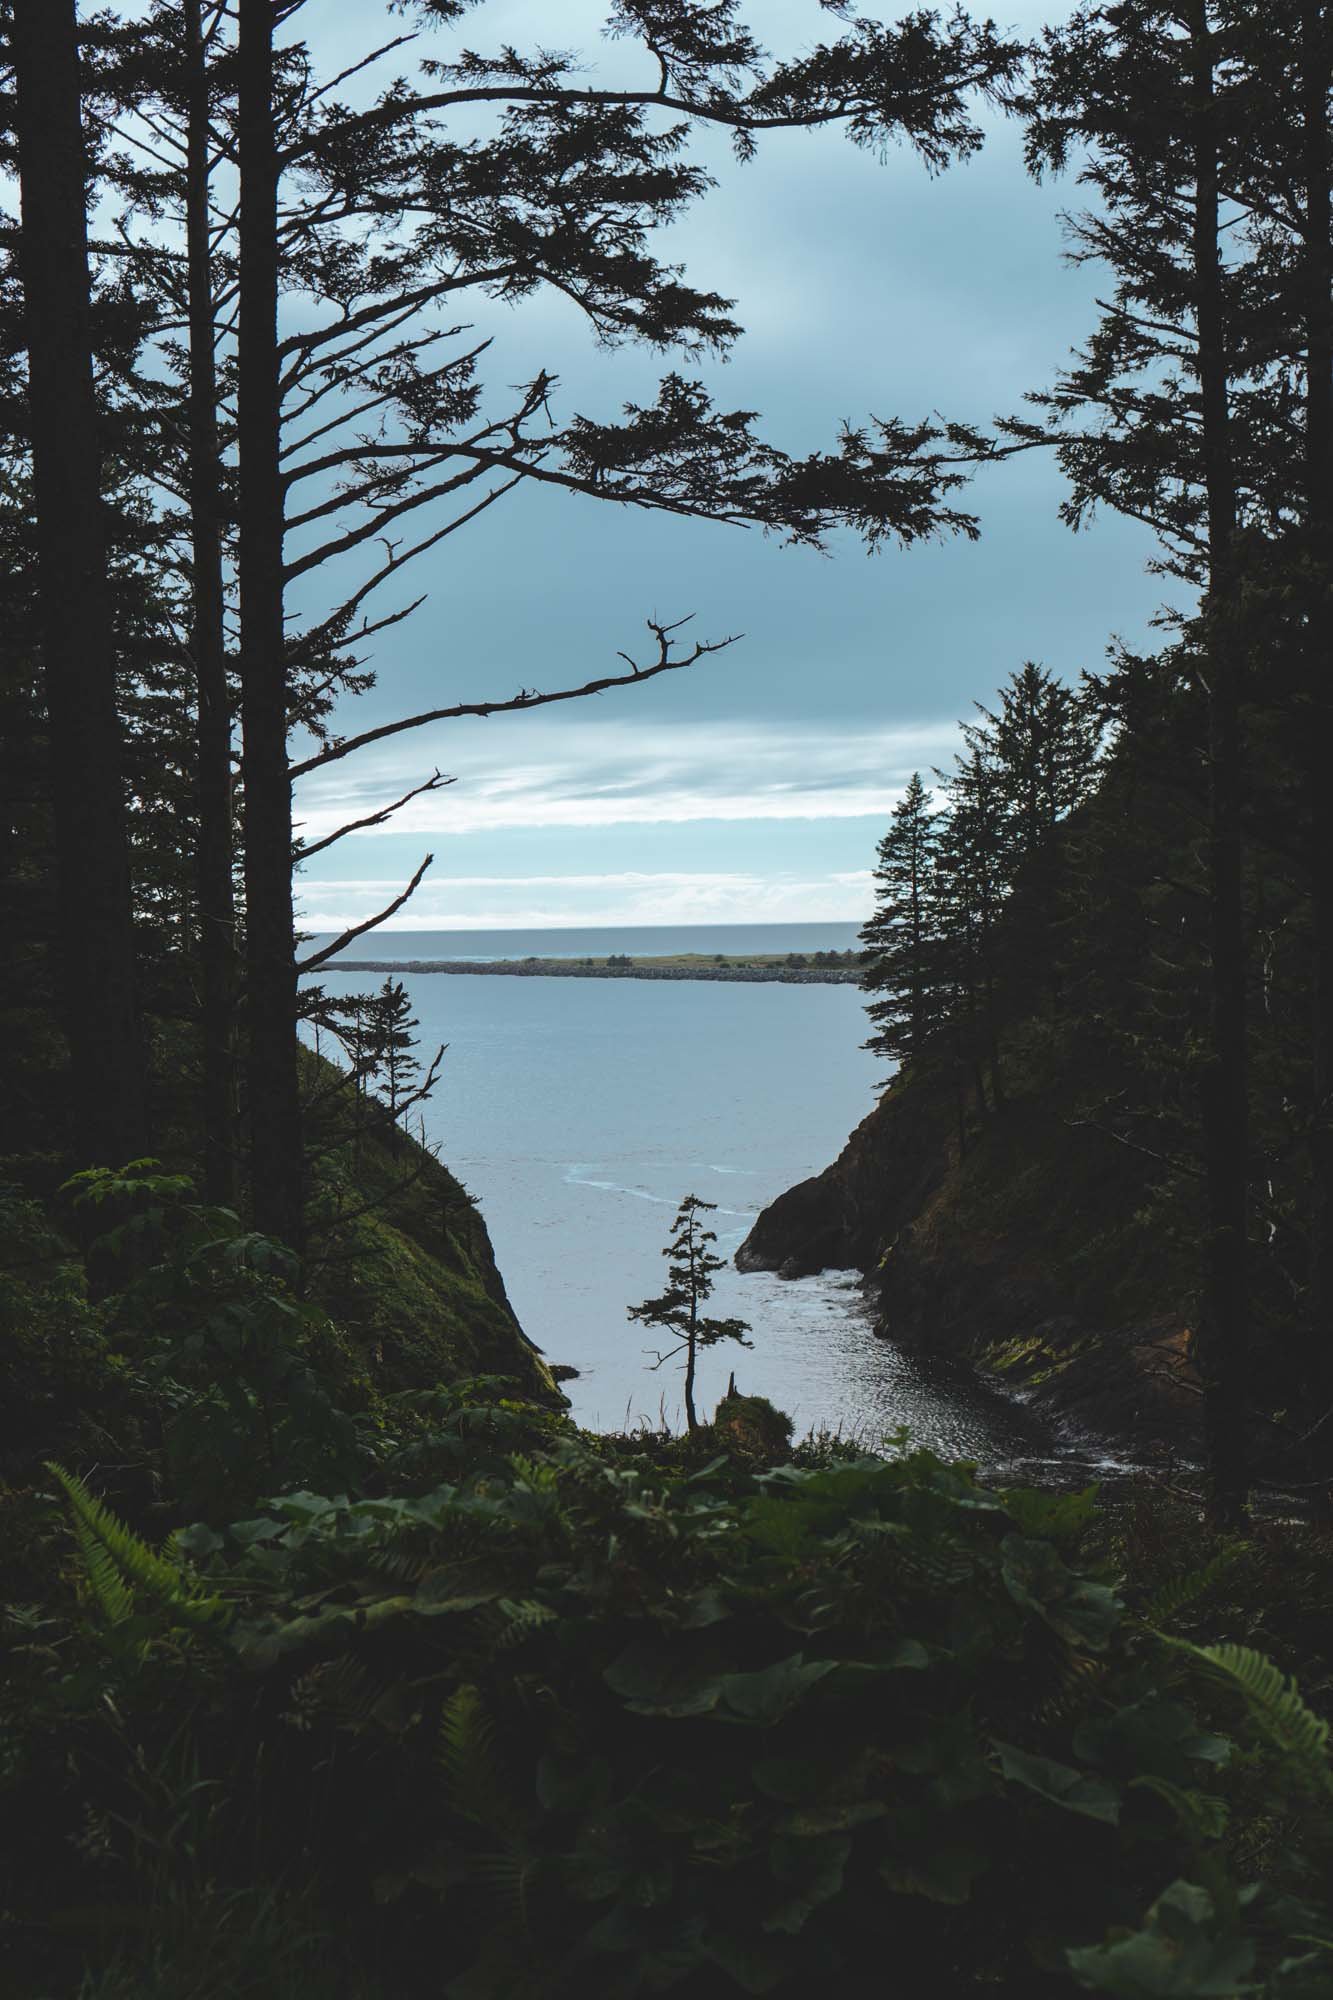 View of the ocean at Cape Disappointment, WA